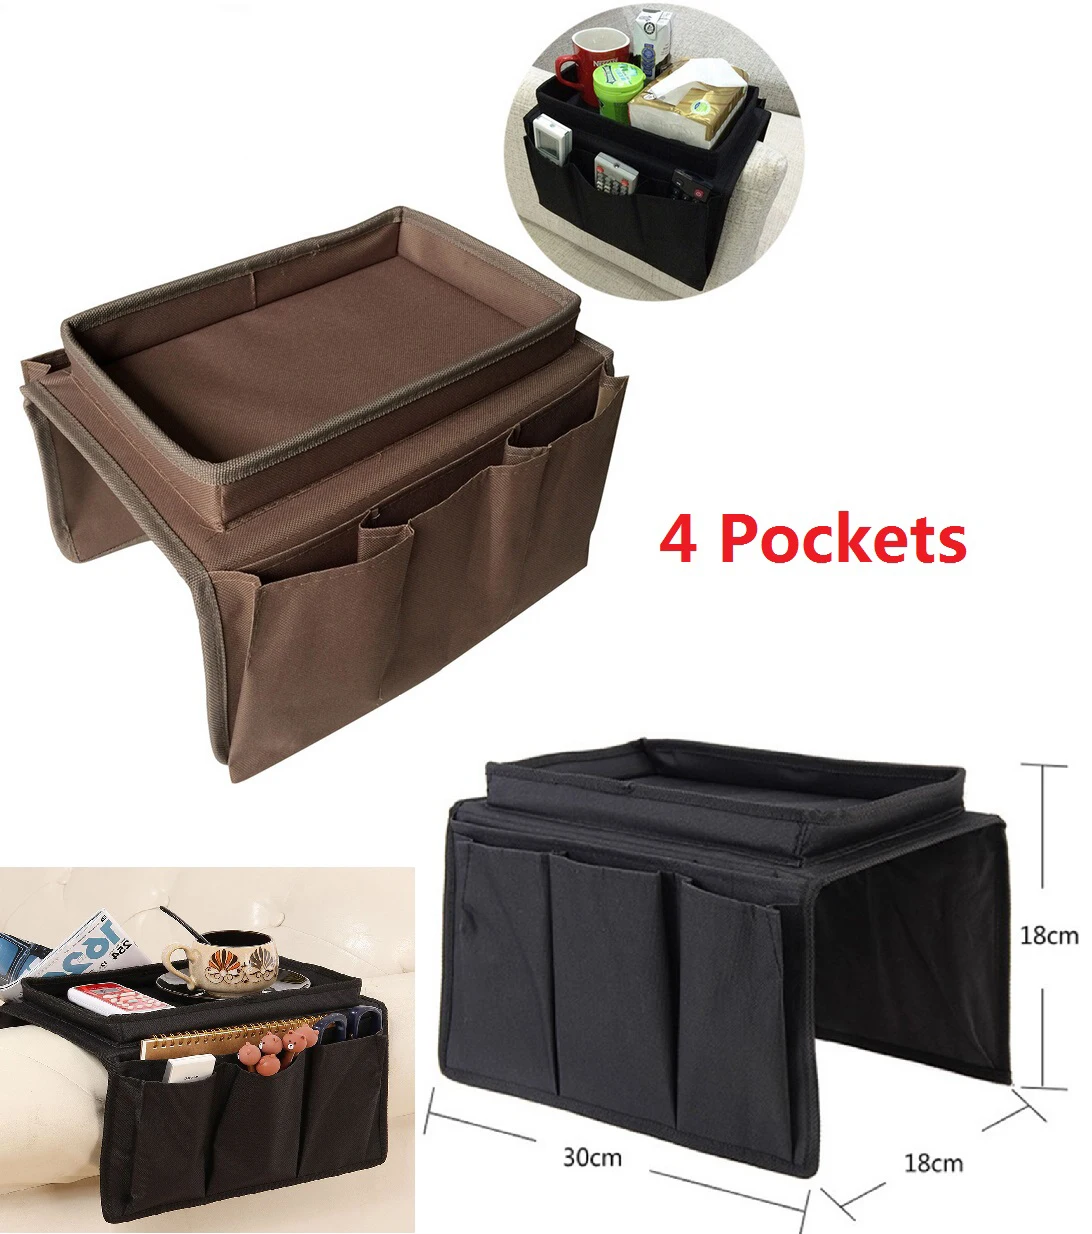 Beige Aolvo Couch Chair Table Cabinet Storage Space Saver Bags Remote Control Holder for Phone Book Magazines 6 Pocket Sofa Armrest Organizer With Tray 